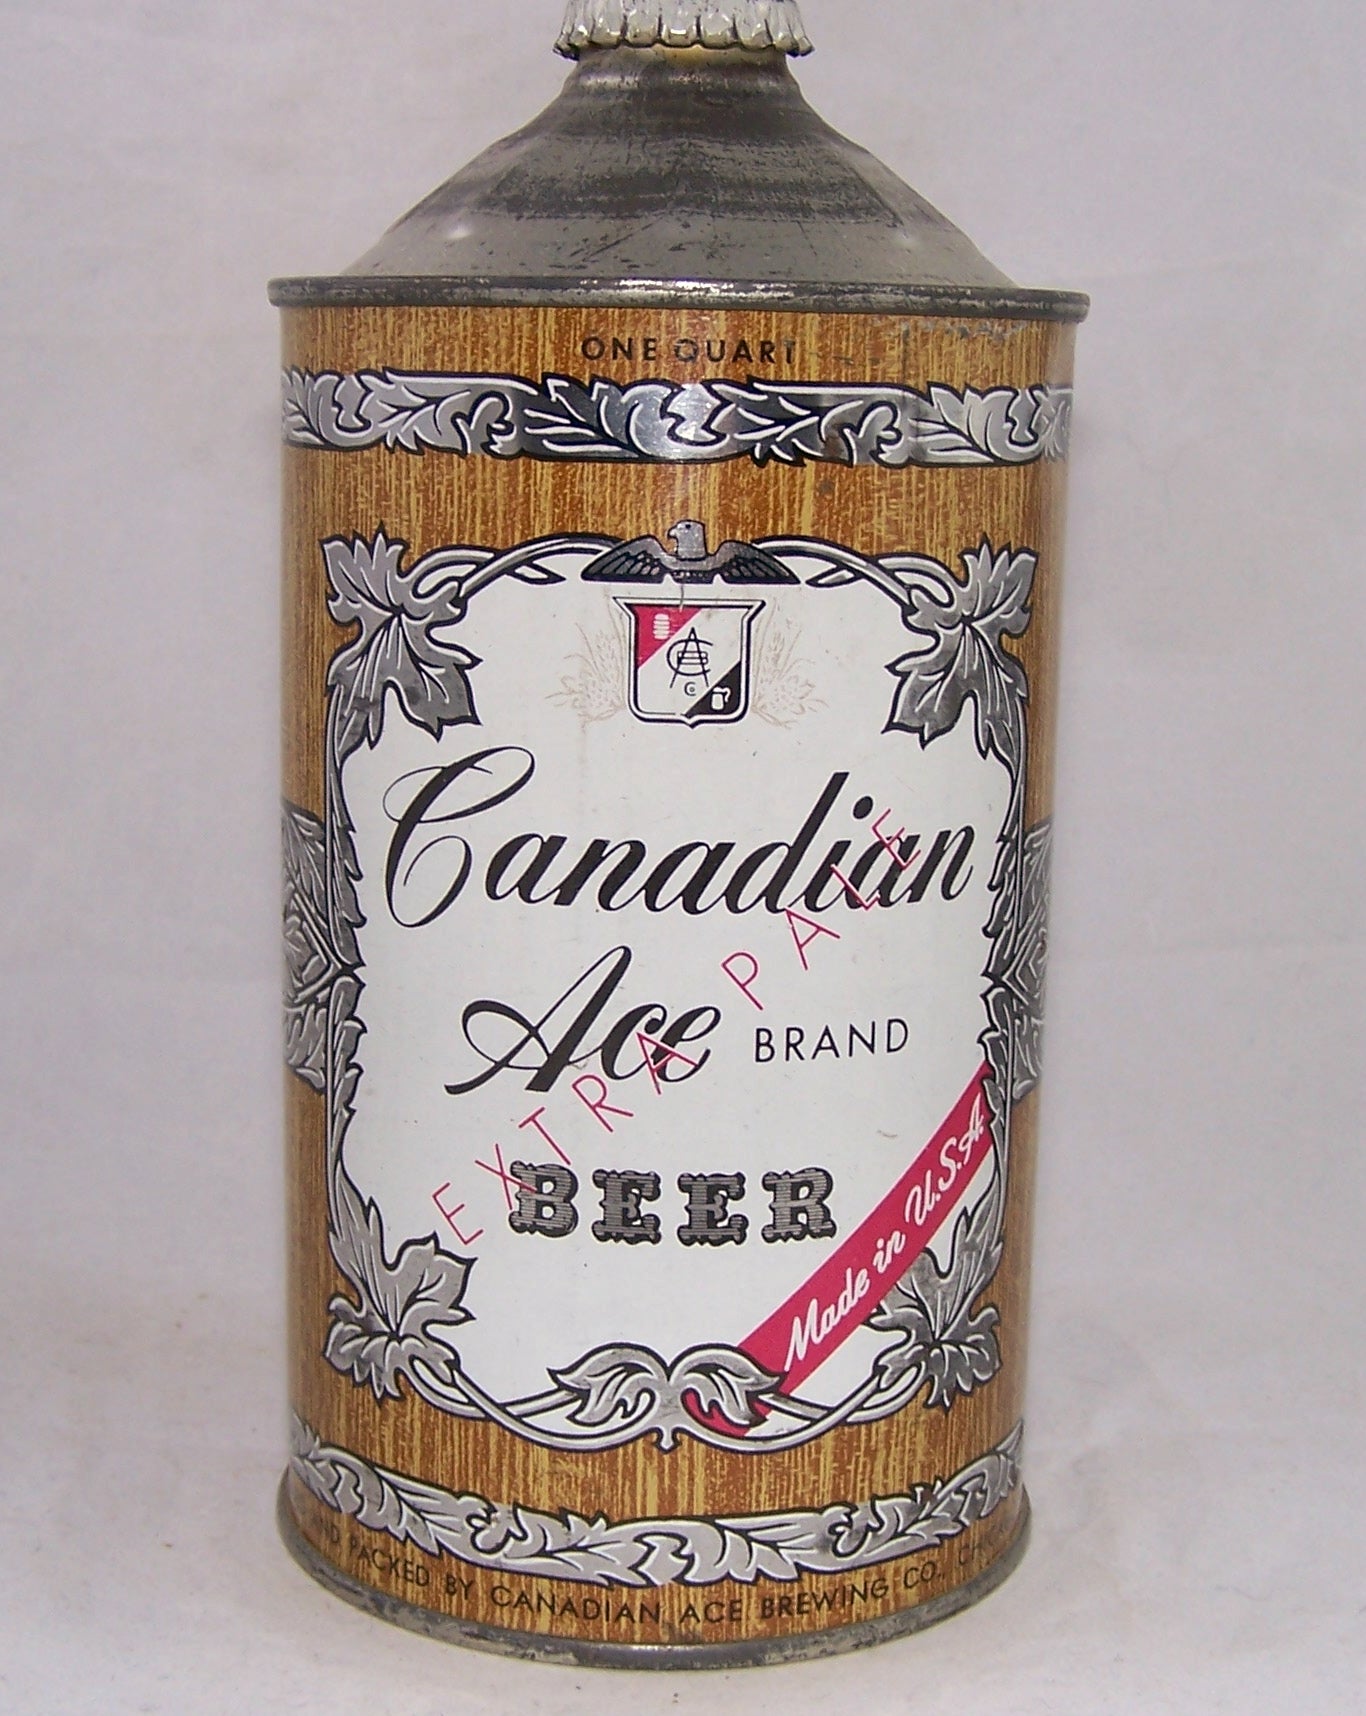 Canadian Ace Beer, USBC 205-05, Grade 1/1+ Sold on 11/27/17